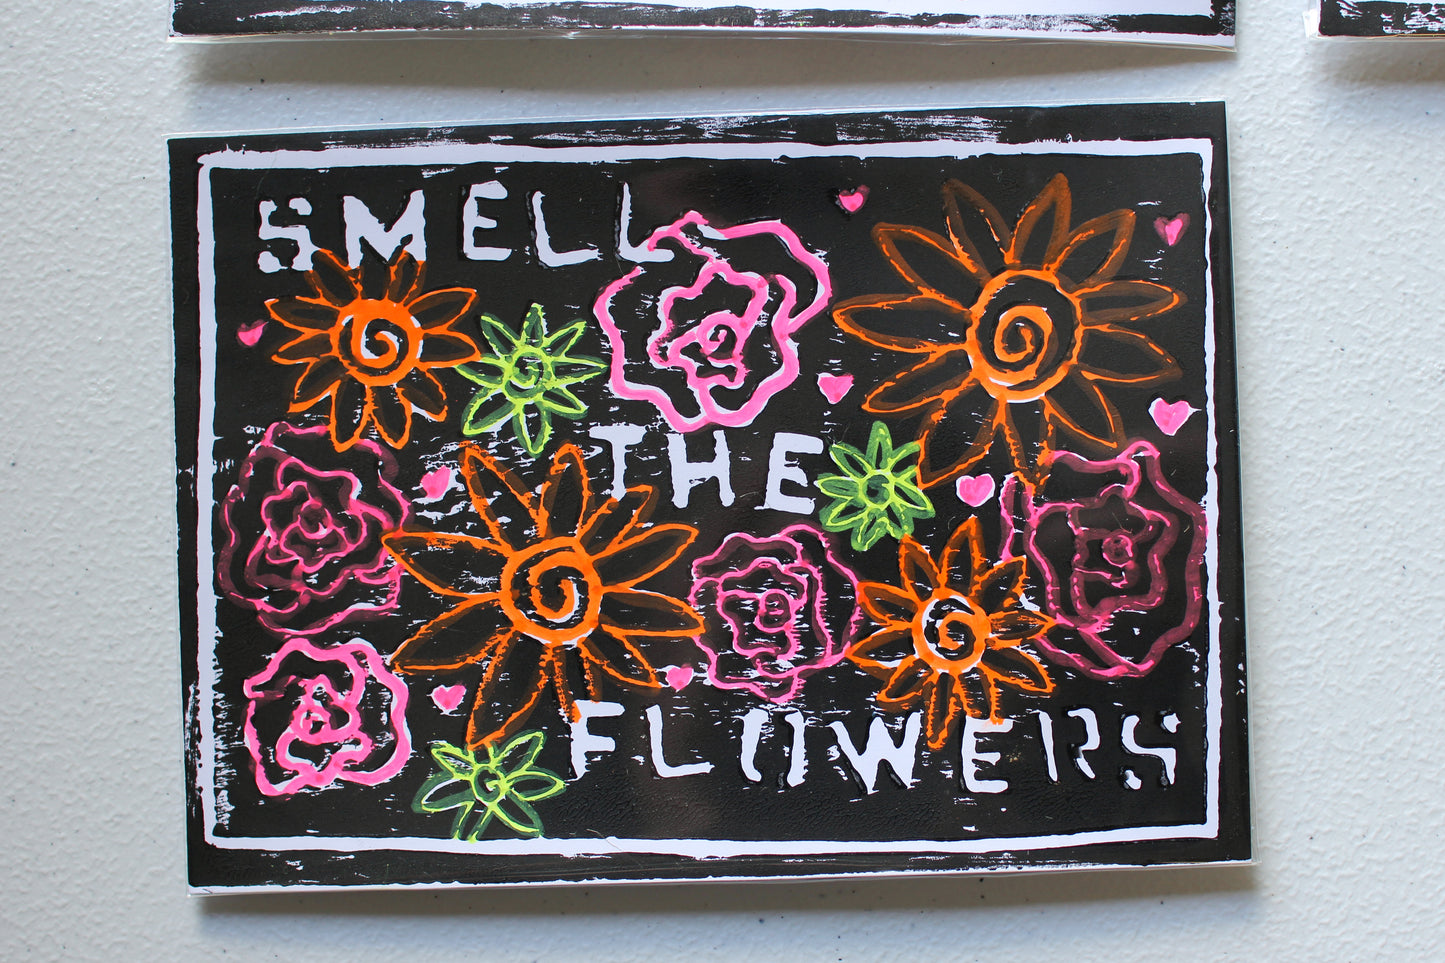 Smell The Flowers print